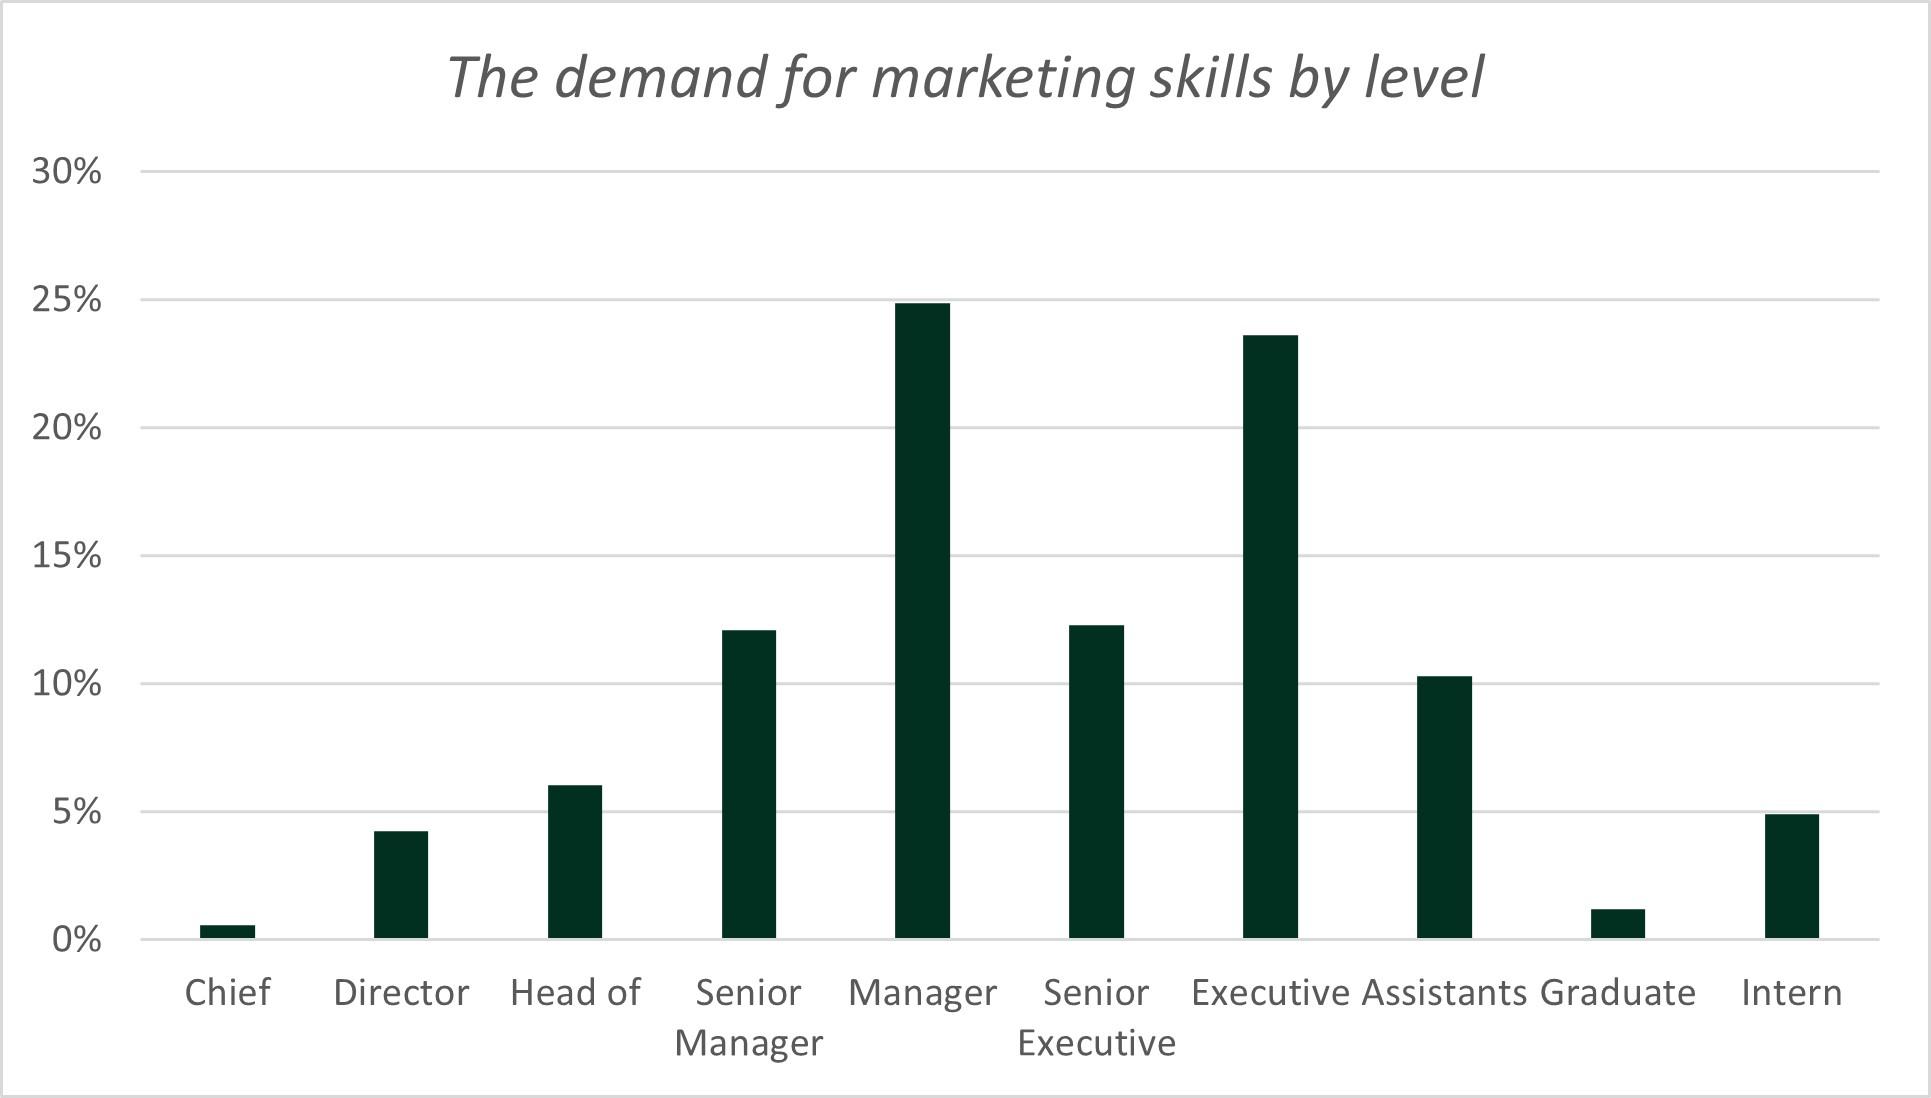 Image of the demand for marketing talent by level